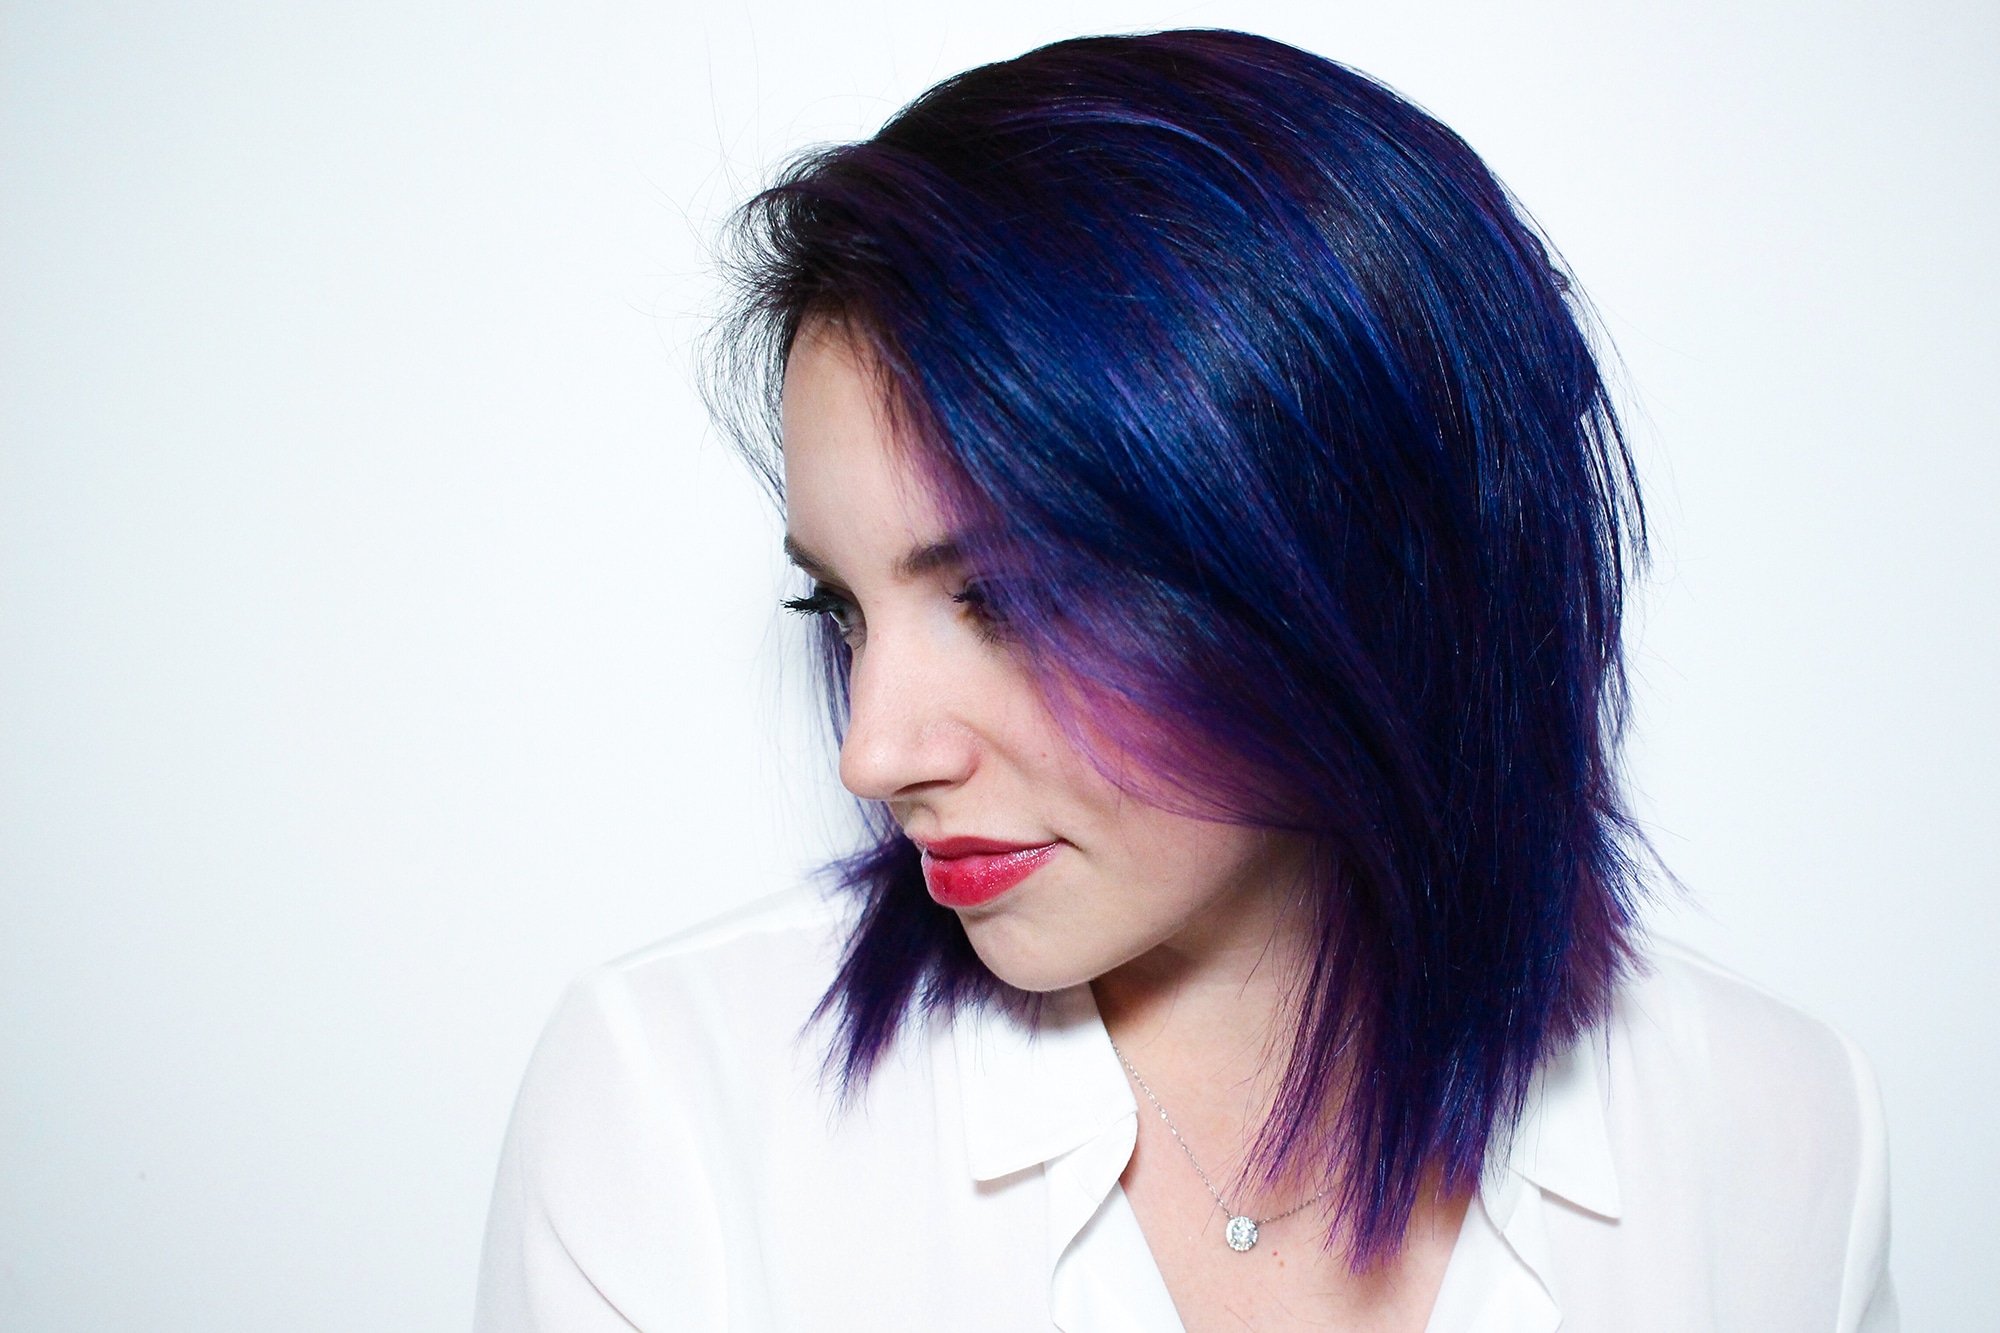 1. How to Dye Your Hair Blue Without Bleach - wide 5